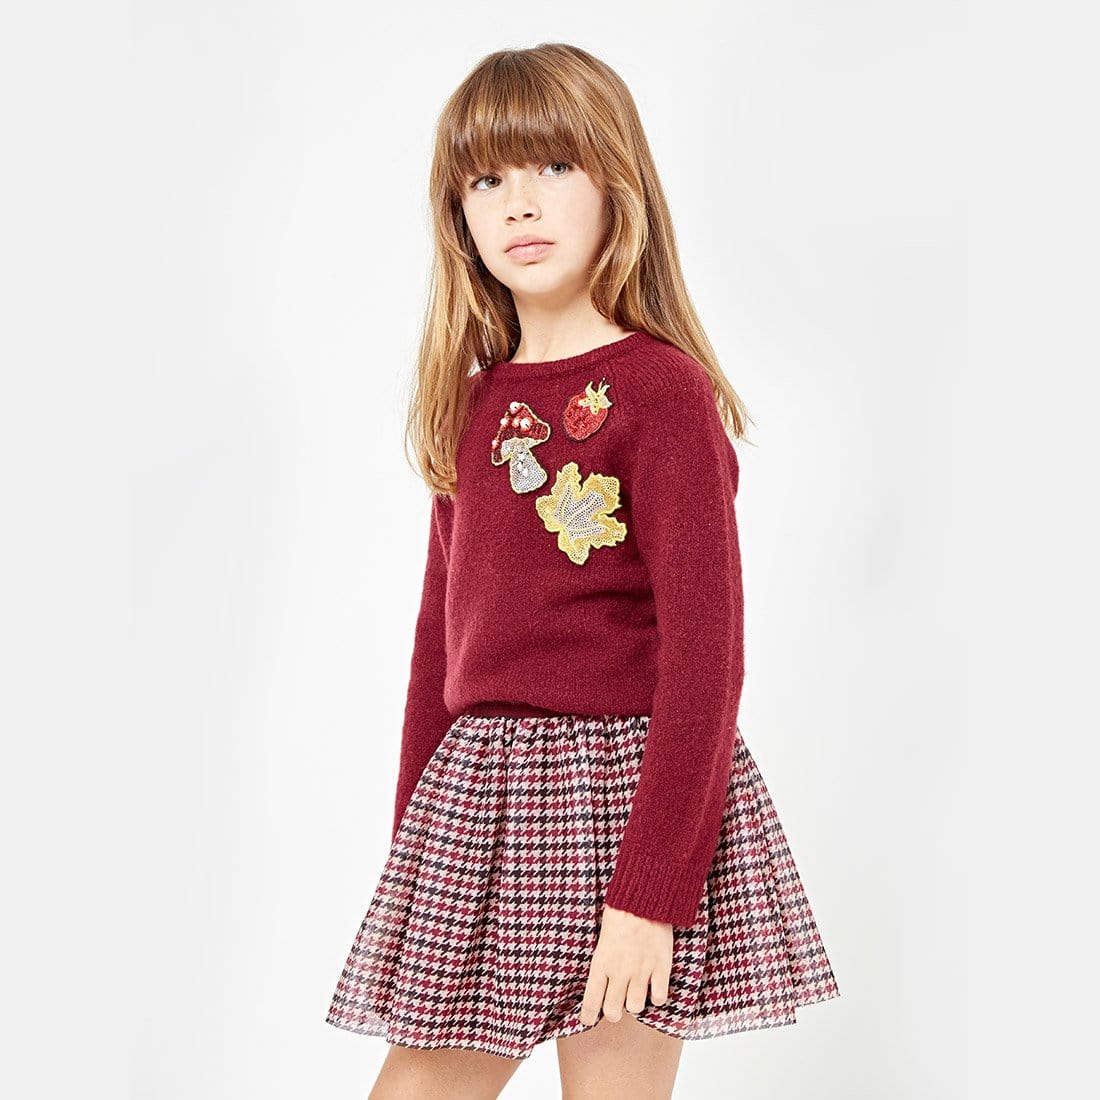 CONGUITOS TEXTIL Clothing Girls Patches Wine Sweater